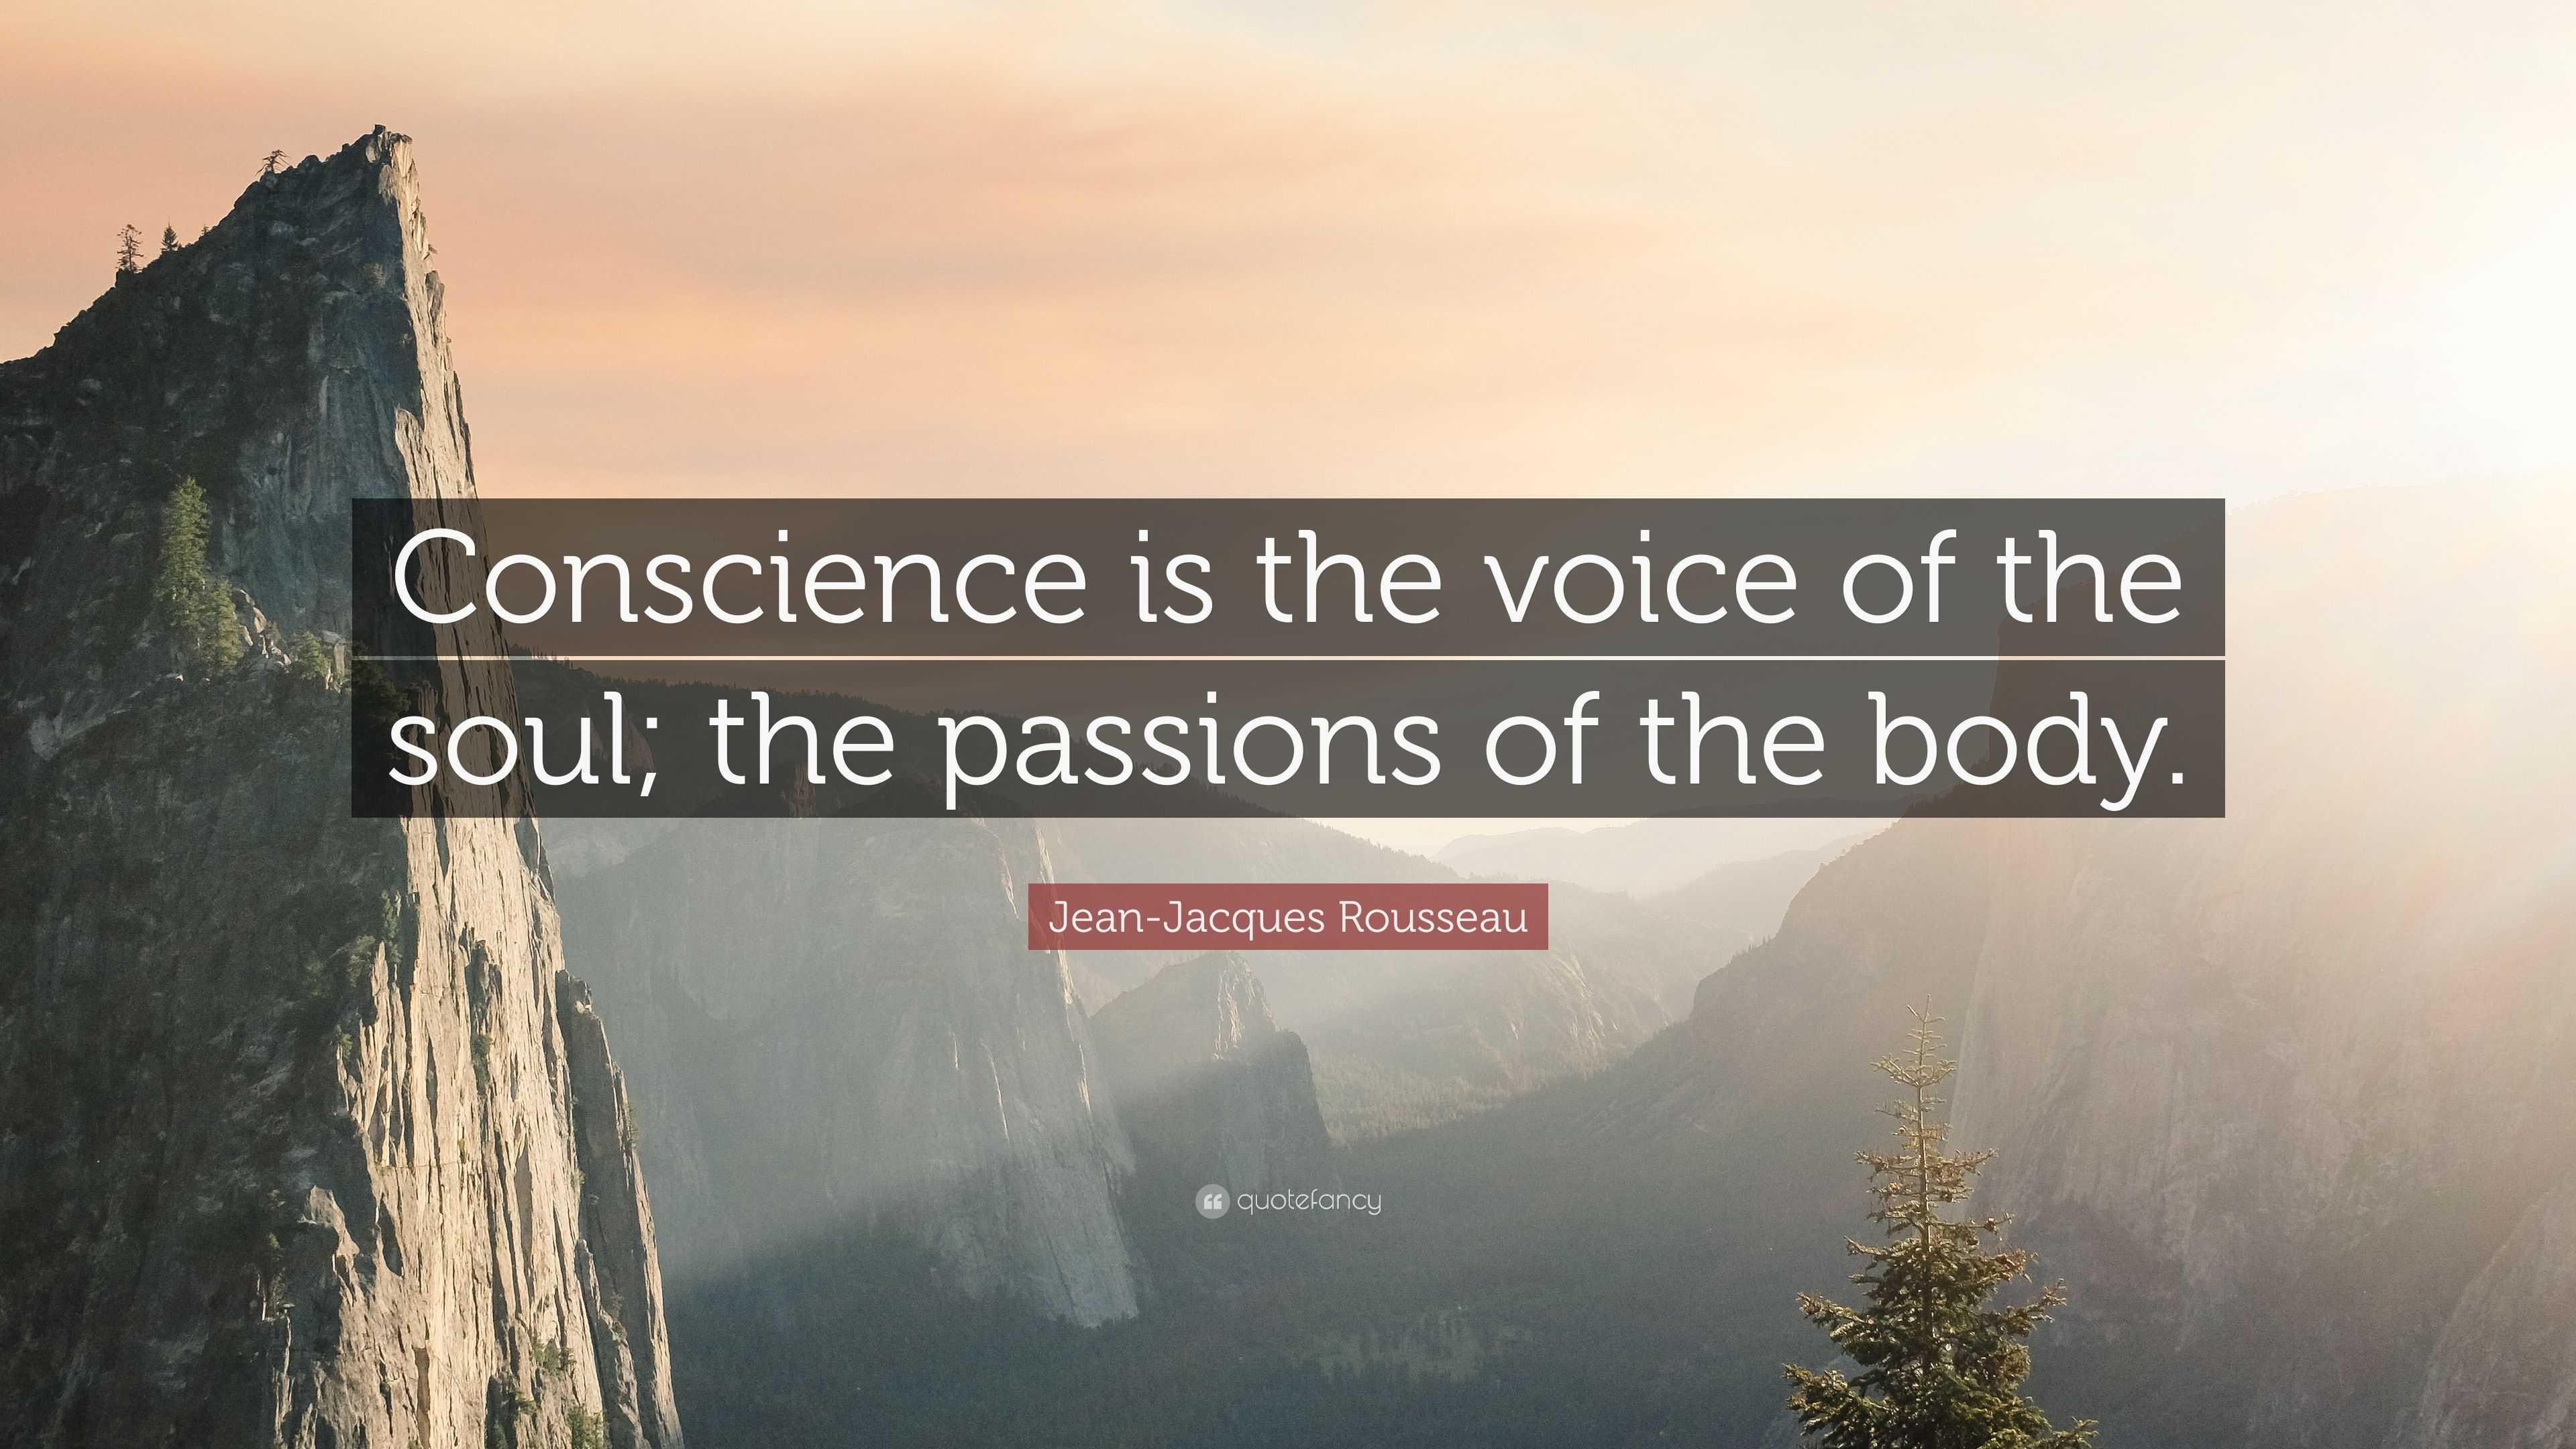 Jean Jacques Rousseau Quote “conscience Is The Voice Of The Soul The Passions Of The Body”